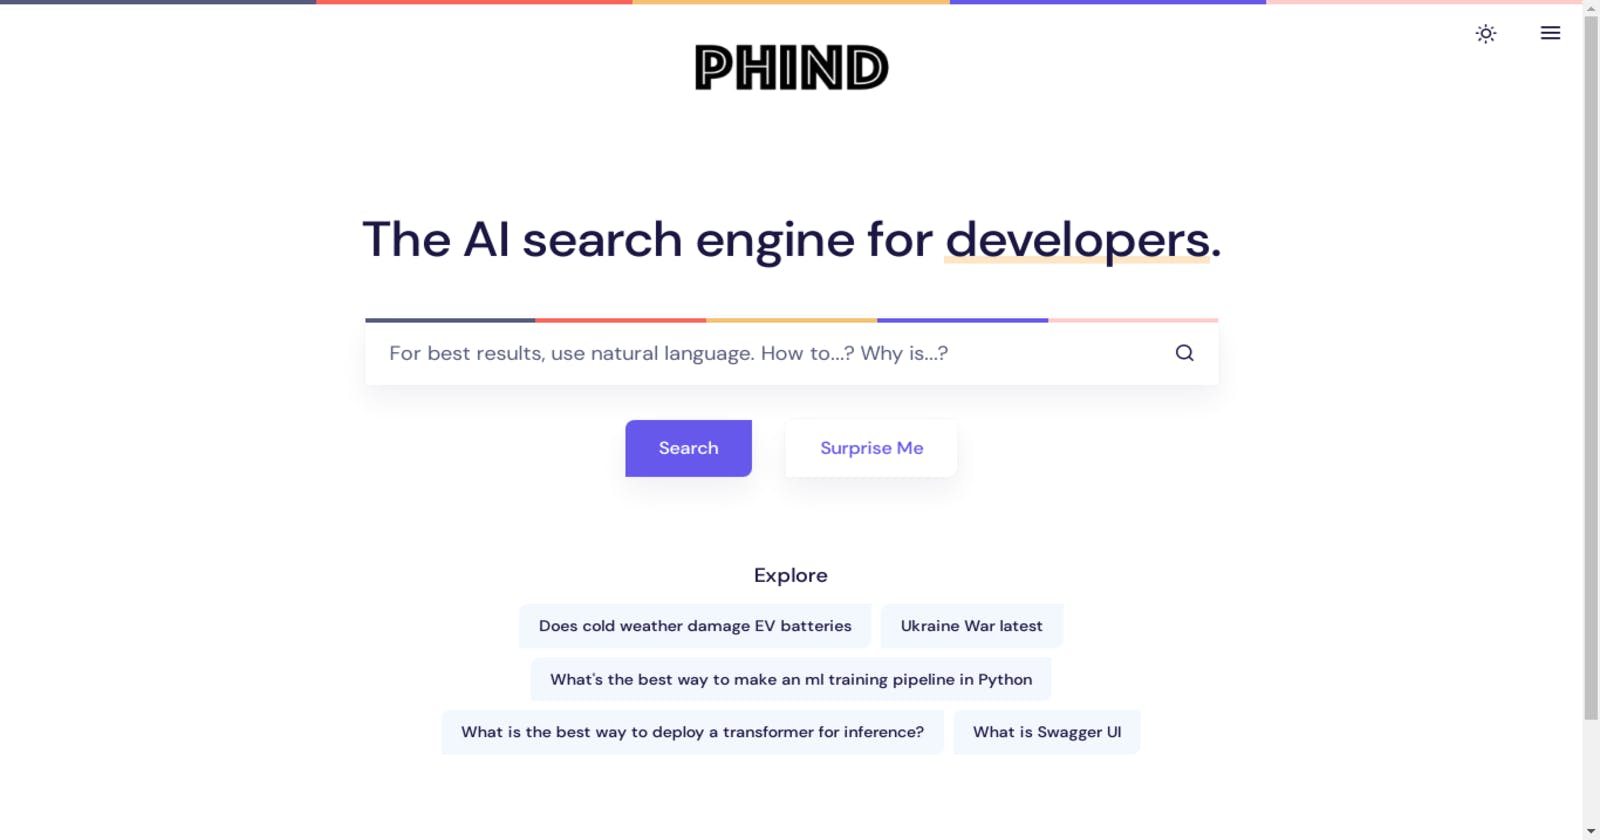 Power Up Your Coding with Phind's AI-Powered Search Engine for Developers